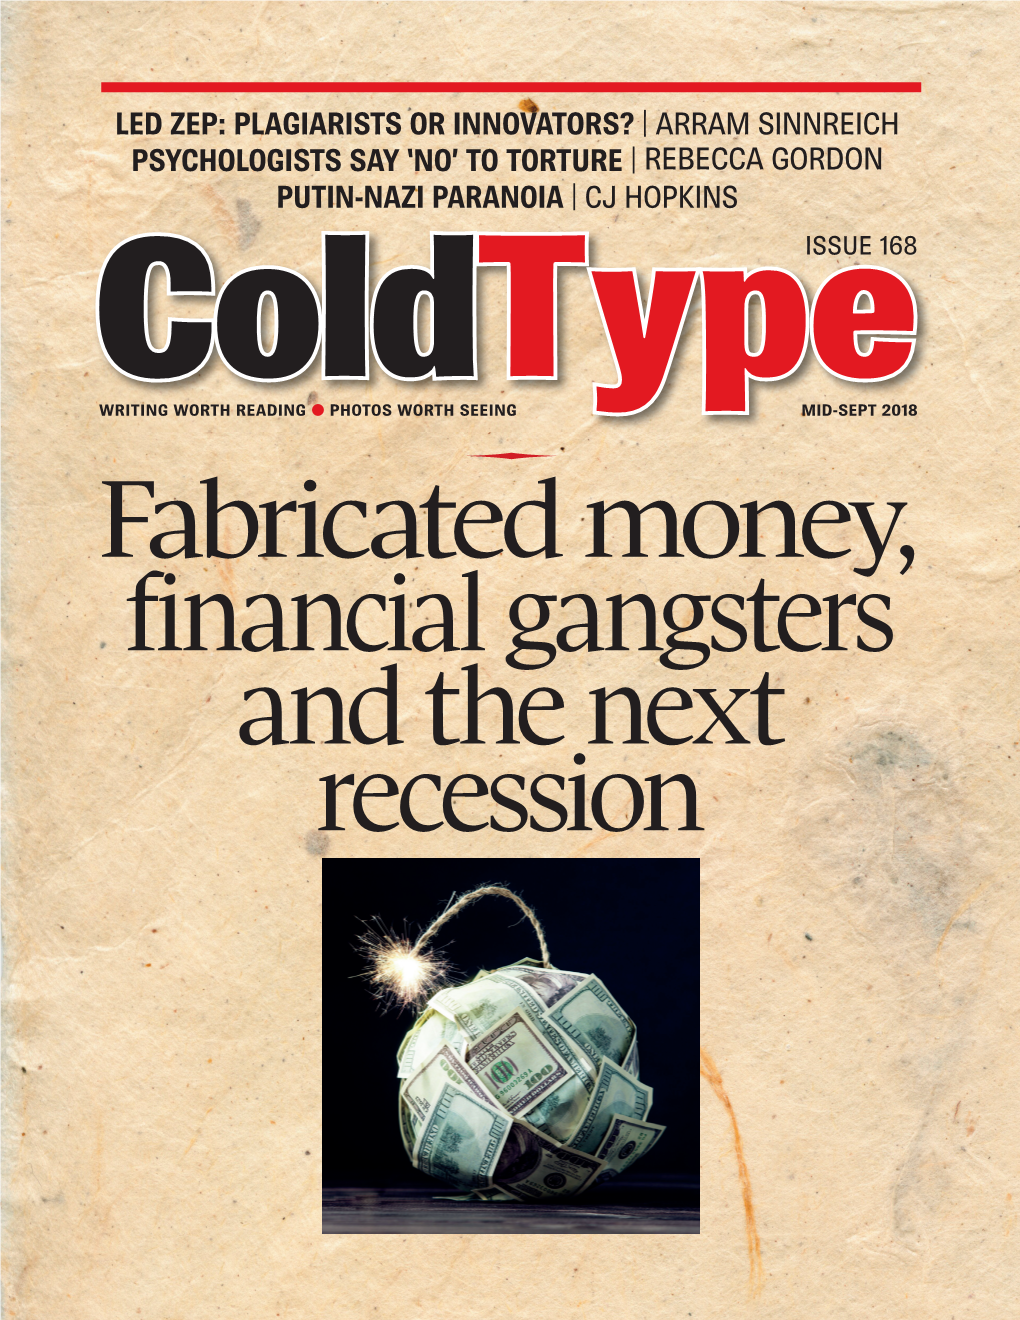 Fabricated Money, Financial Gangsters and the Next Recession Have You Read All 167 Issues of Coldtype?